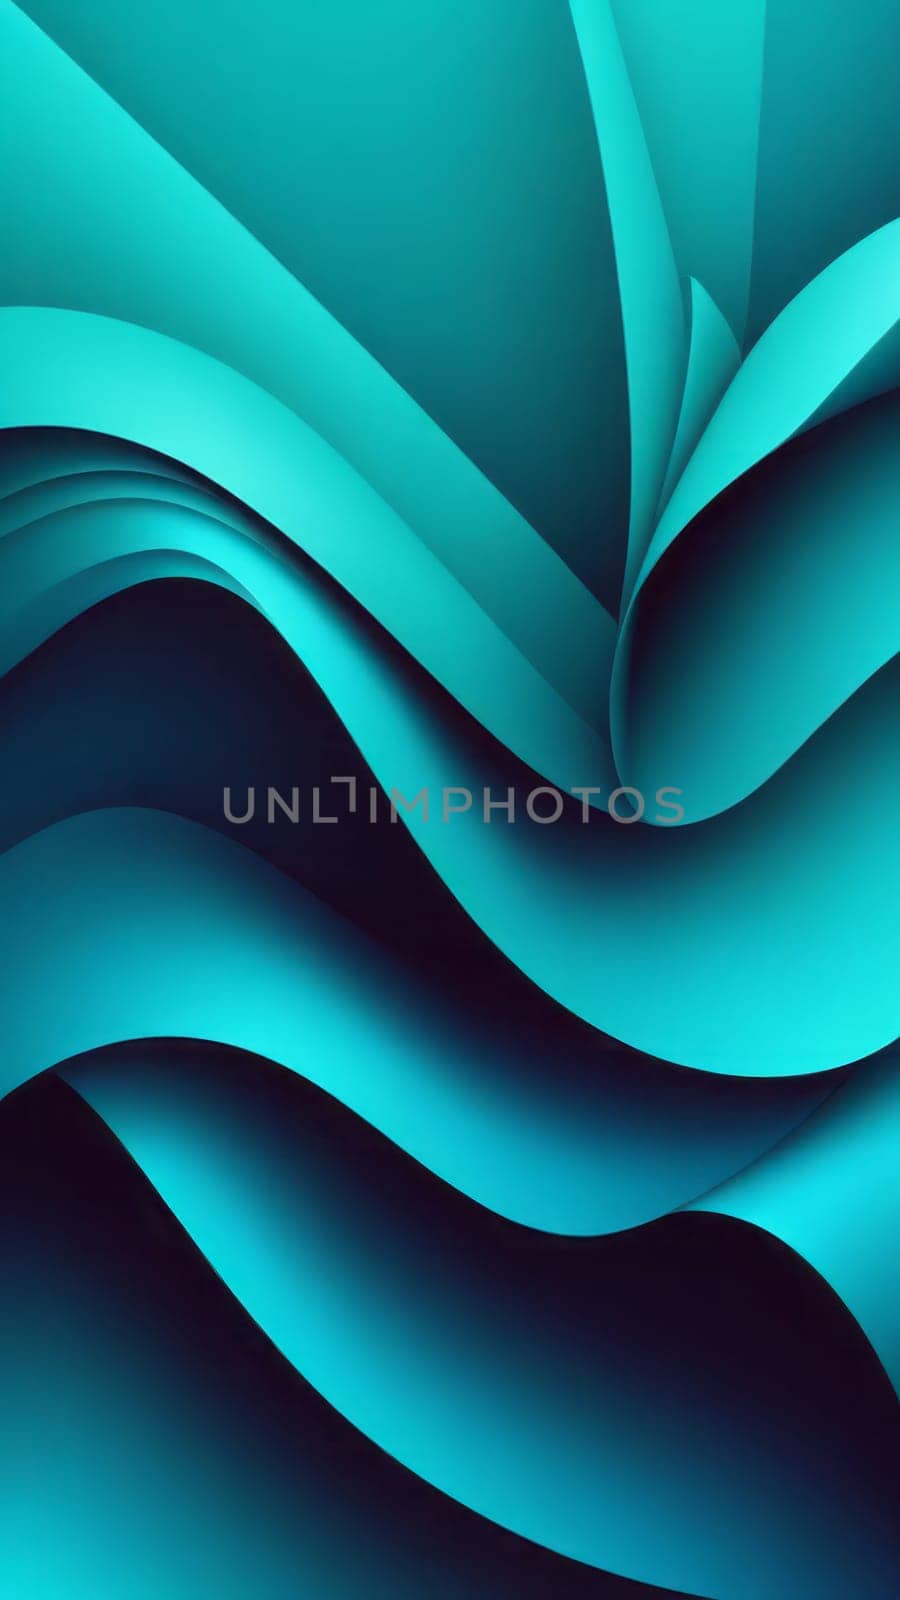 Art for inspiration from Folded shapes and teal by nkotlyar